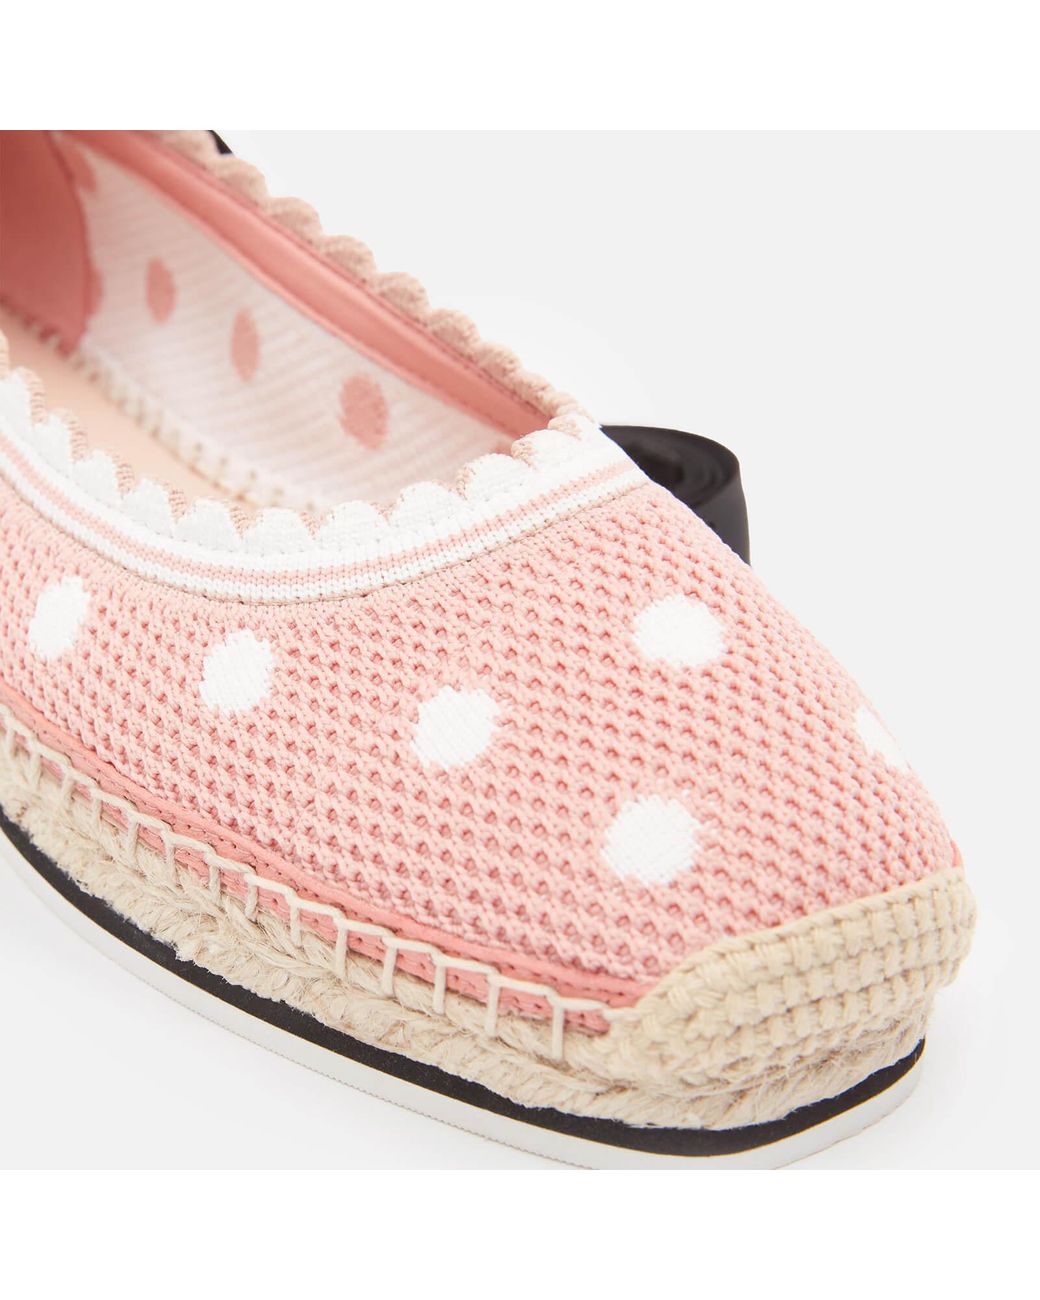 Kate Spade Knottingham Knitted Espadrilles in Pink | Lyst